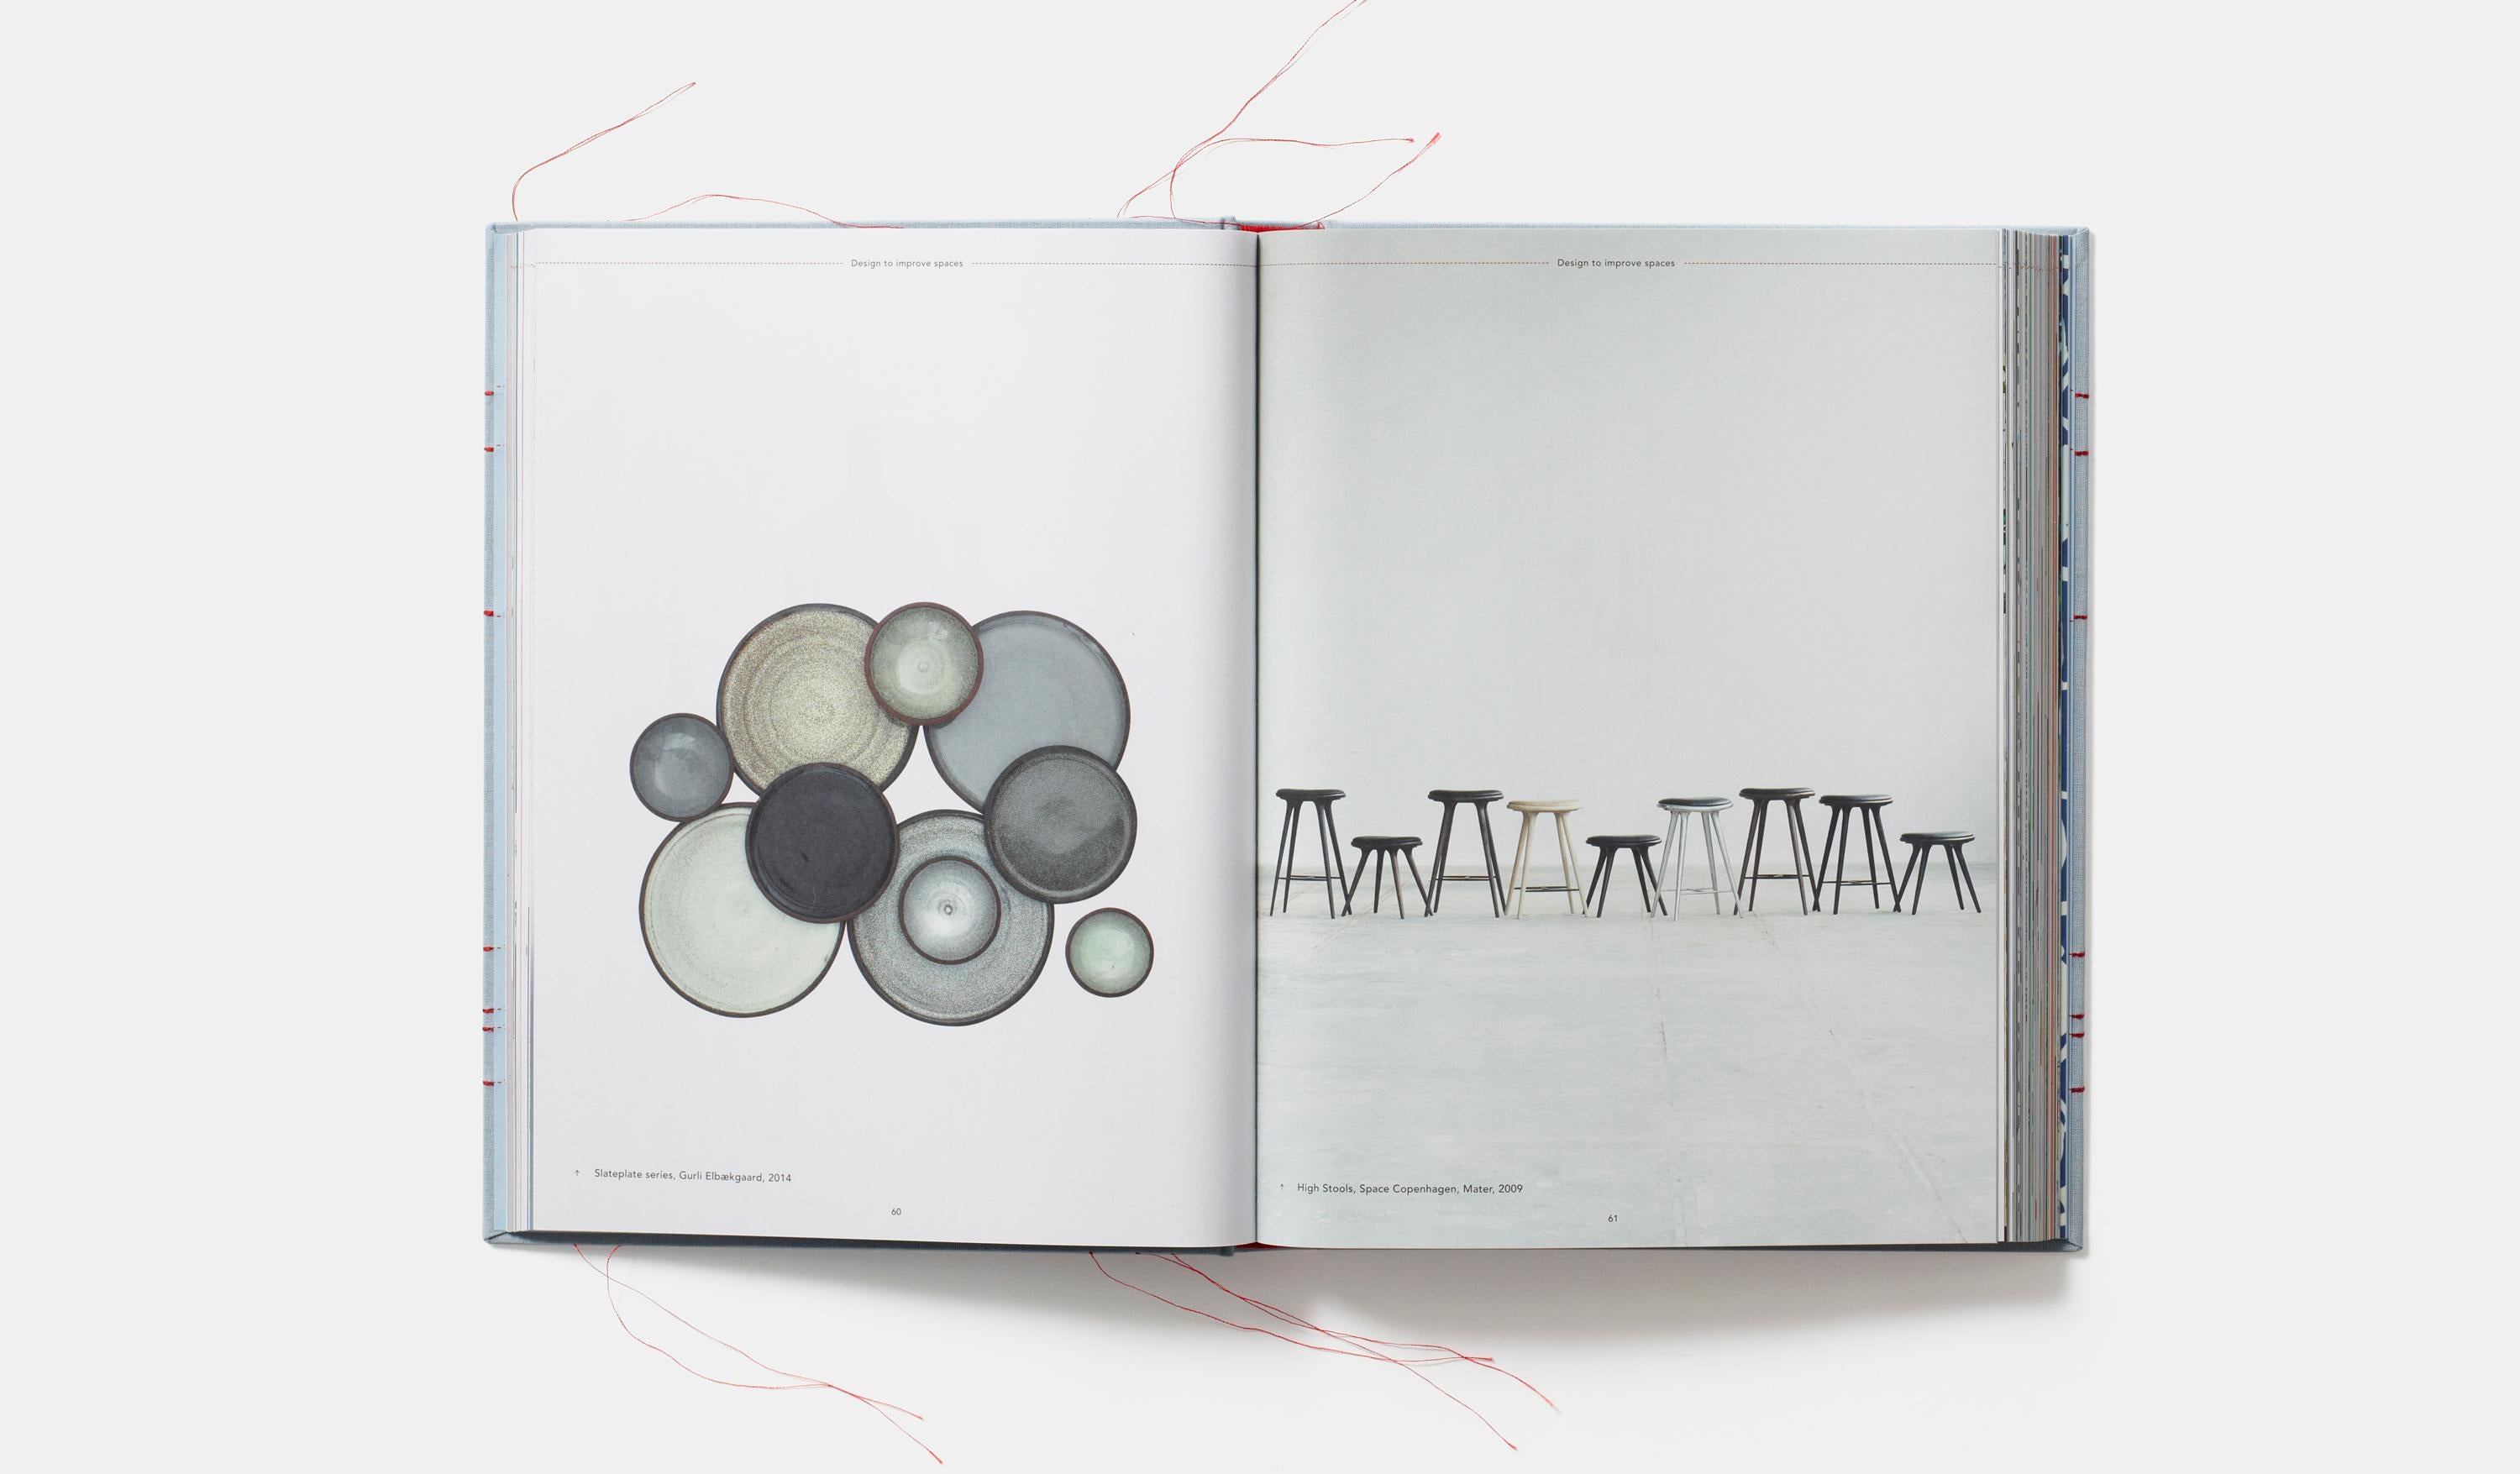 An elegant exploration of the hugely influential simplicity, beauty, and functionality of Nordic design - timeless, yet on trend

From literature to food, lifestyle to fashion, cinema to architecture, Nordic influence is evident throughout